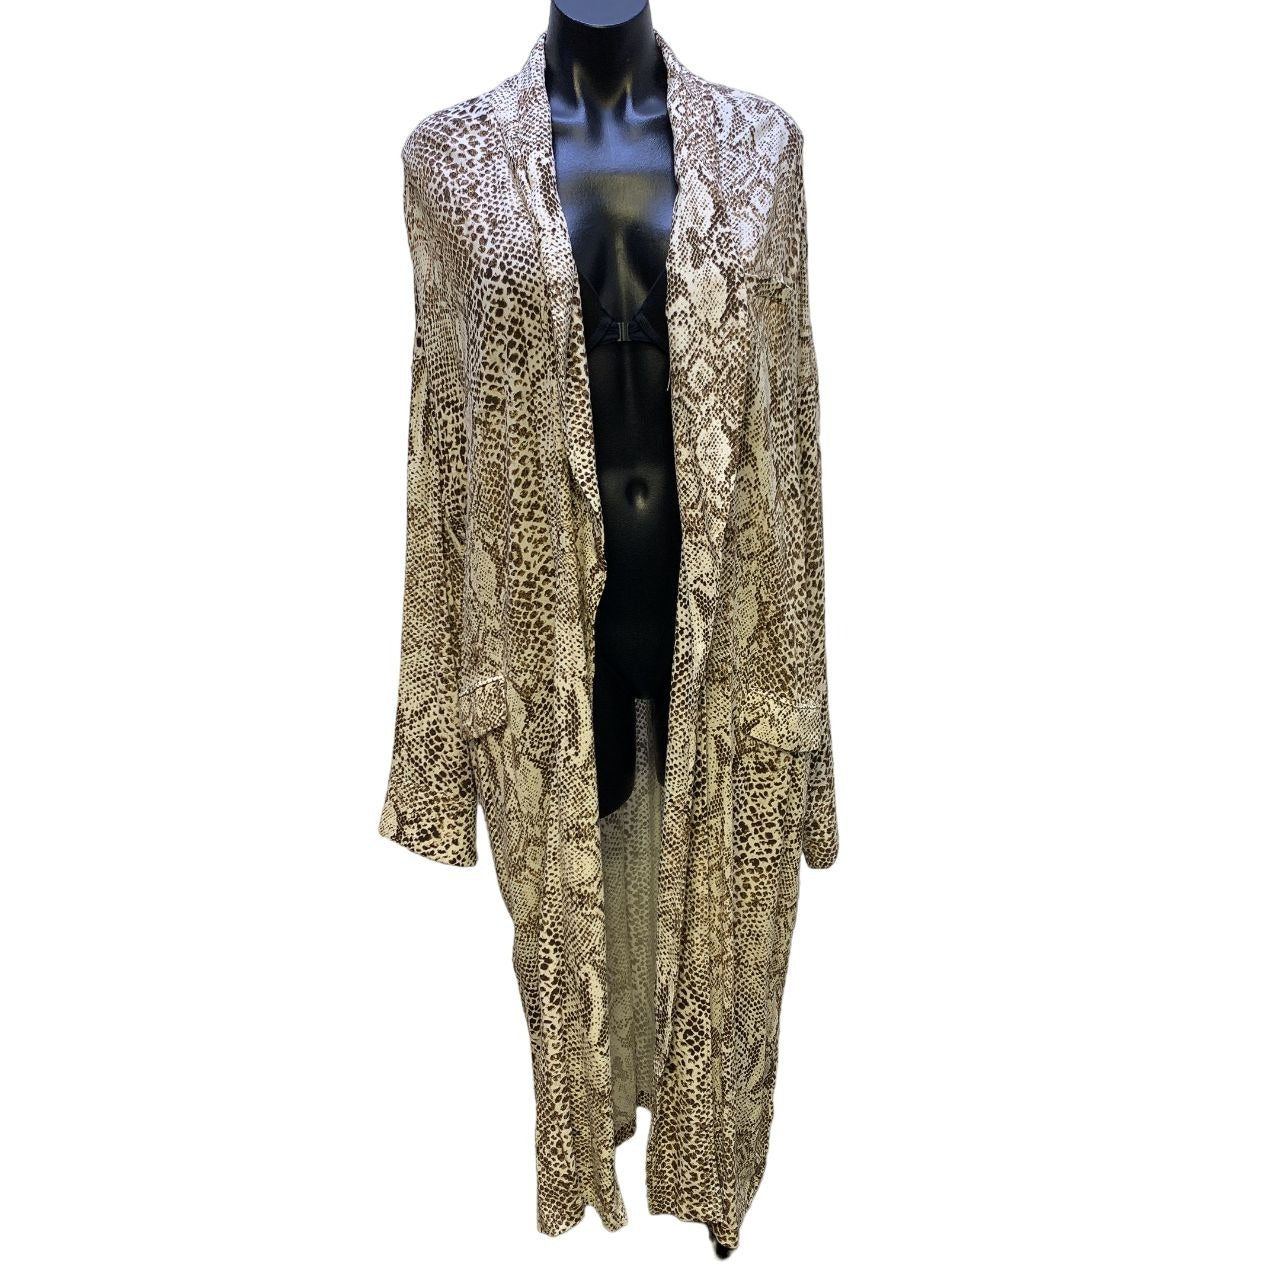 *NWT Free People Brown & White Snake Print Open Cardigan/Duster Size Medium